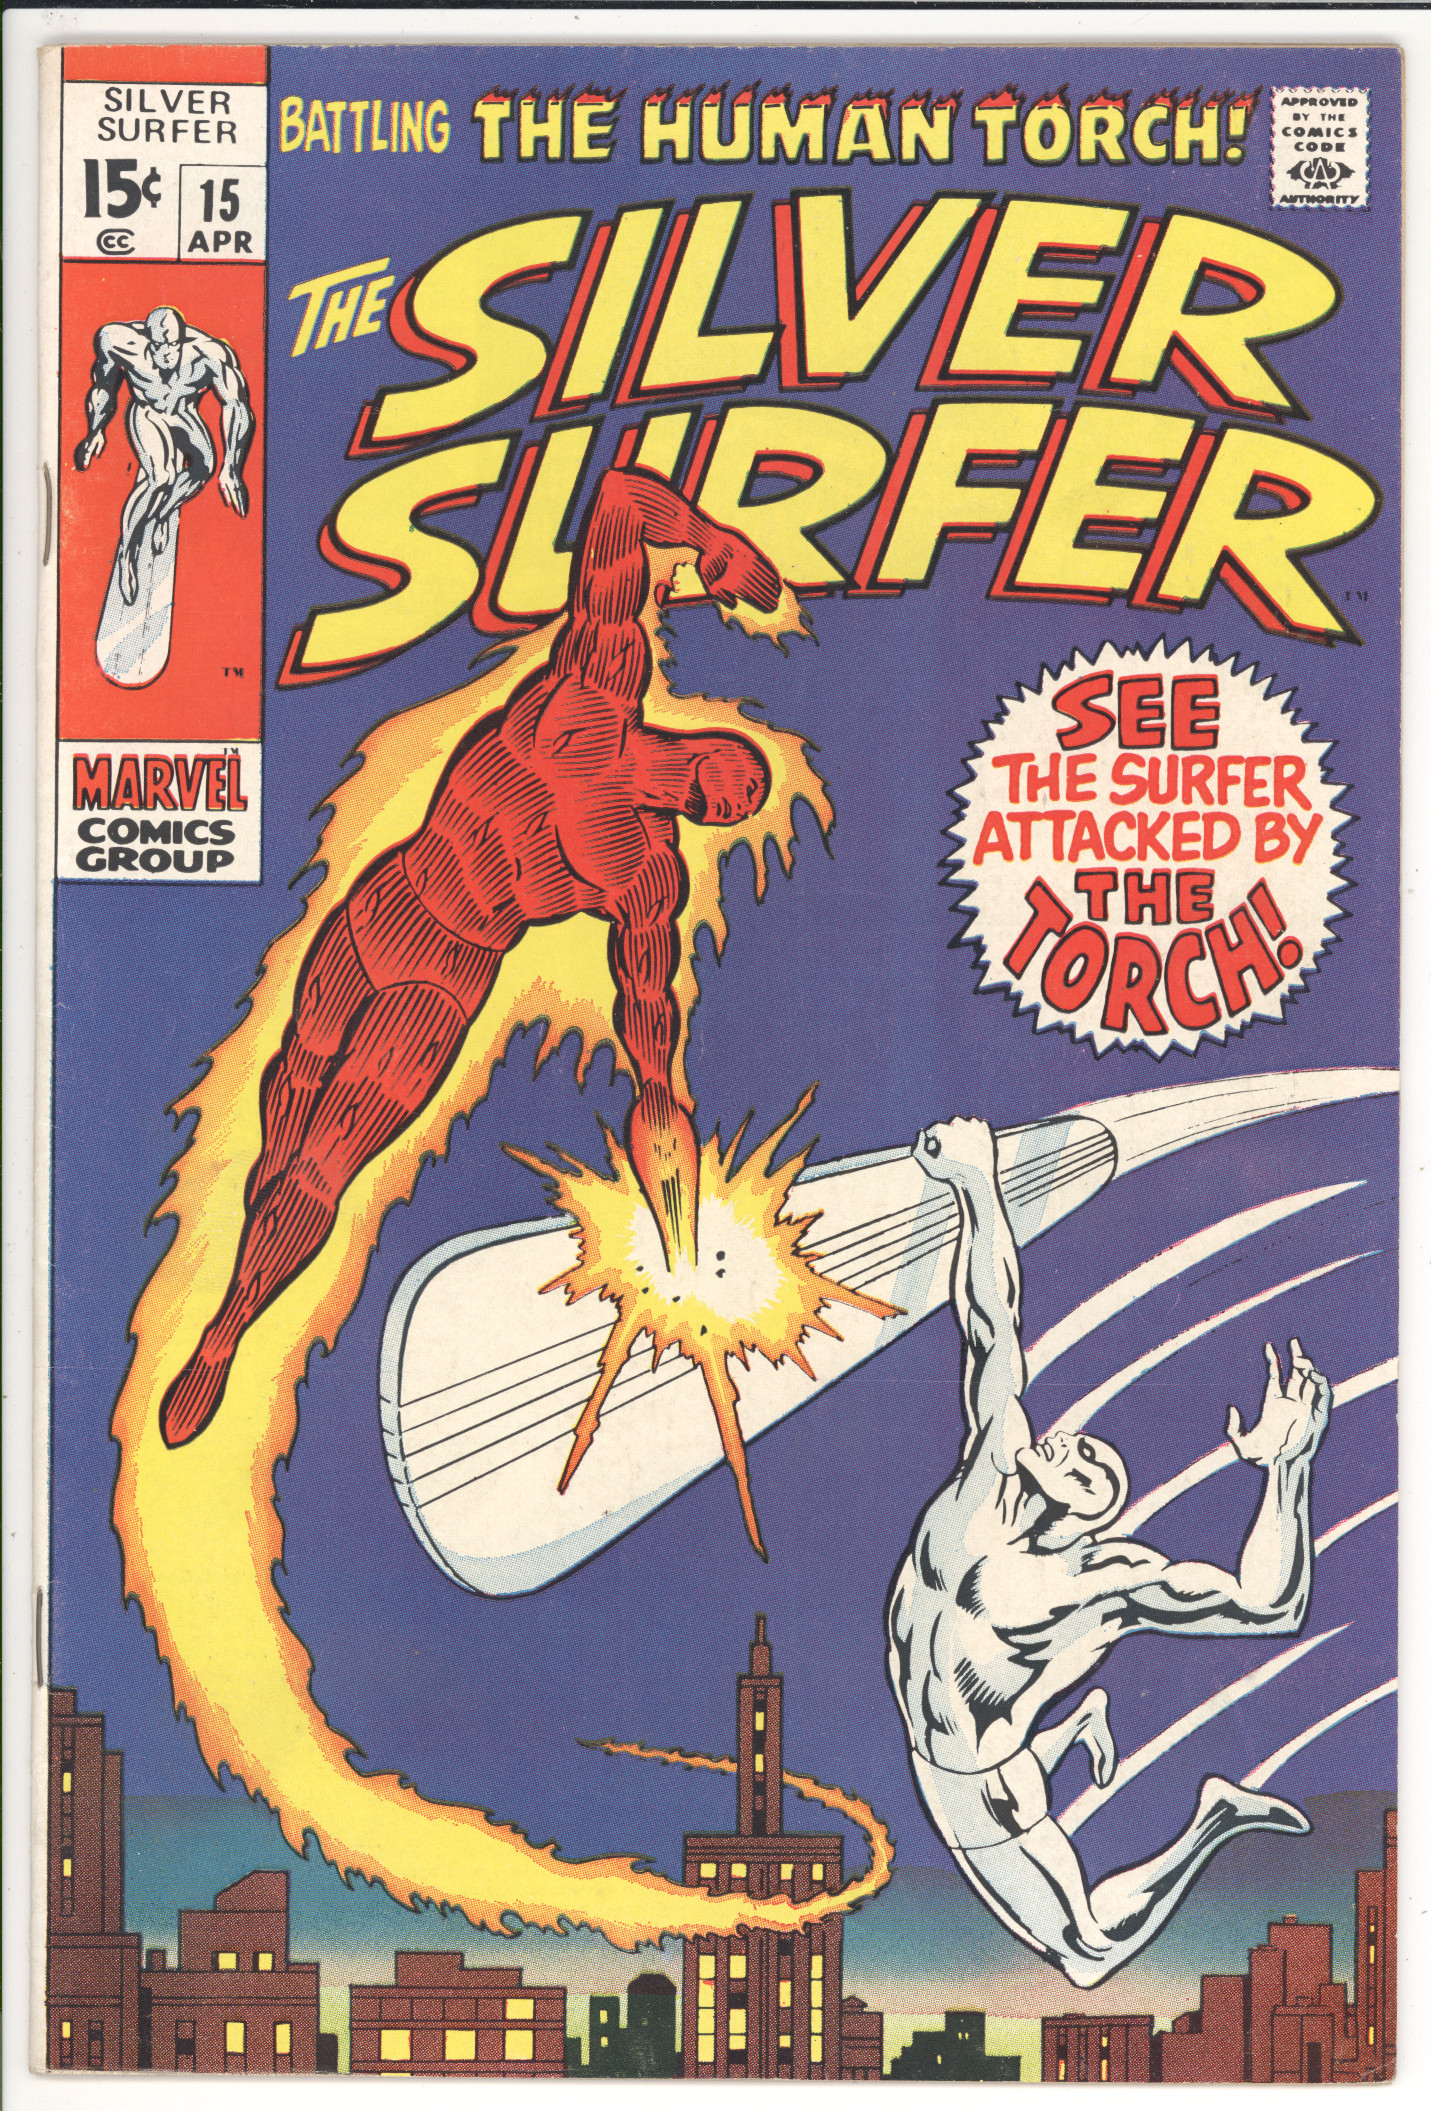 Silver Surfer #15 front